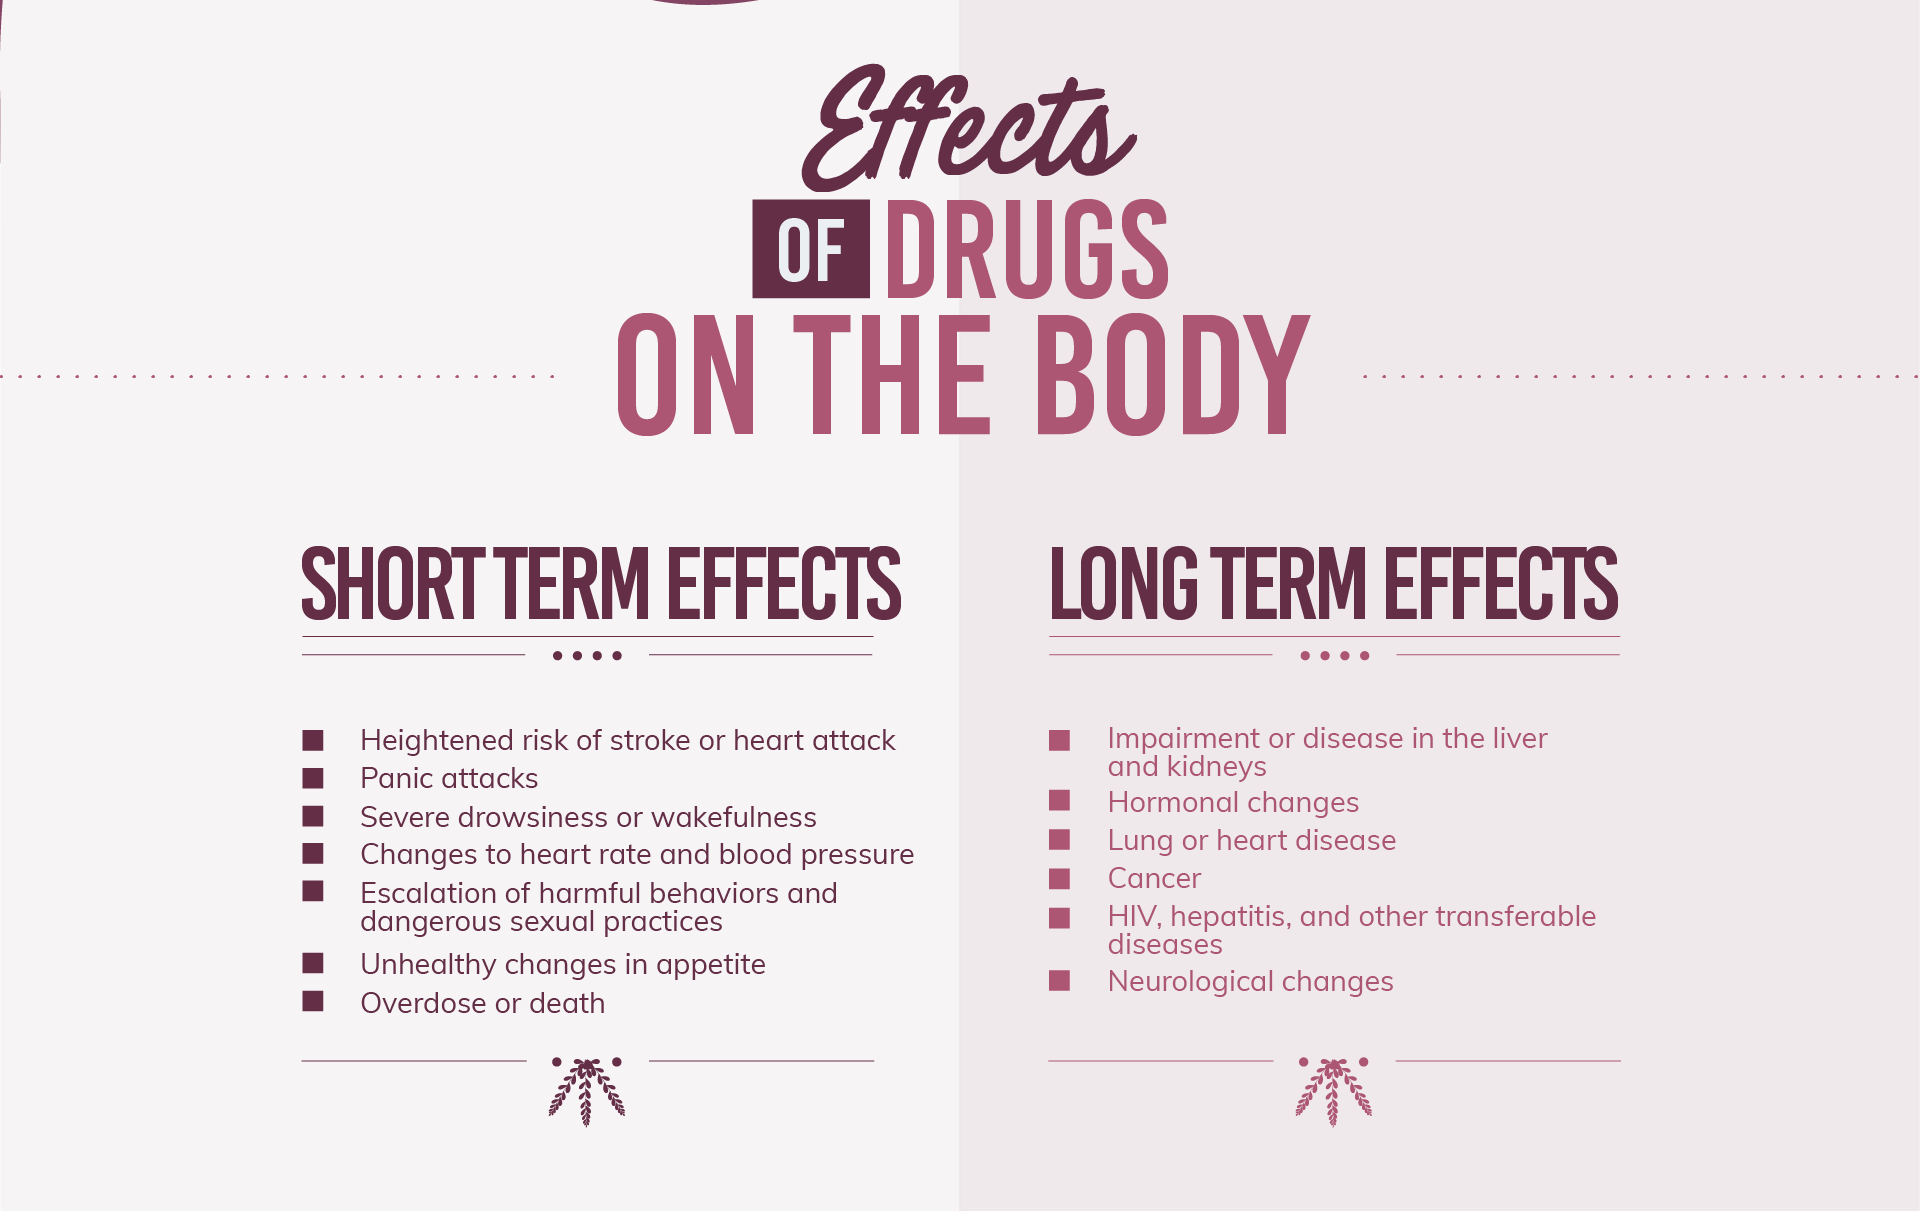 The short term effects of the drugs on the body are, heightened risk of stroke or heart attack, panic attacks, severe drowsiness or wakefulness, changes to heart rate abd blood pressure, escalation of harmful behaviors and dangerous sexual practices, unhealthy changes in appetite and overdose or death. The long tern effects of the drugs on the body are, impairment or disease in the liver and kidneys, hormonal changes, lung or heart disease, cancer, HIV, hepatitis and other transferable diseases and neurological changes.